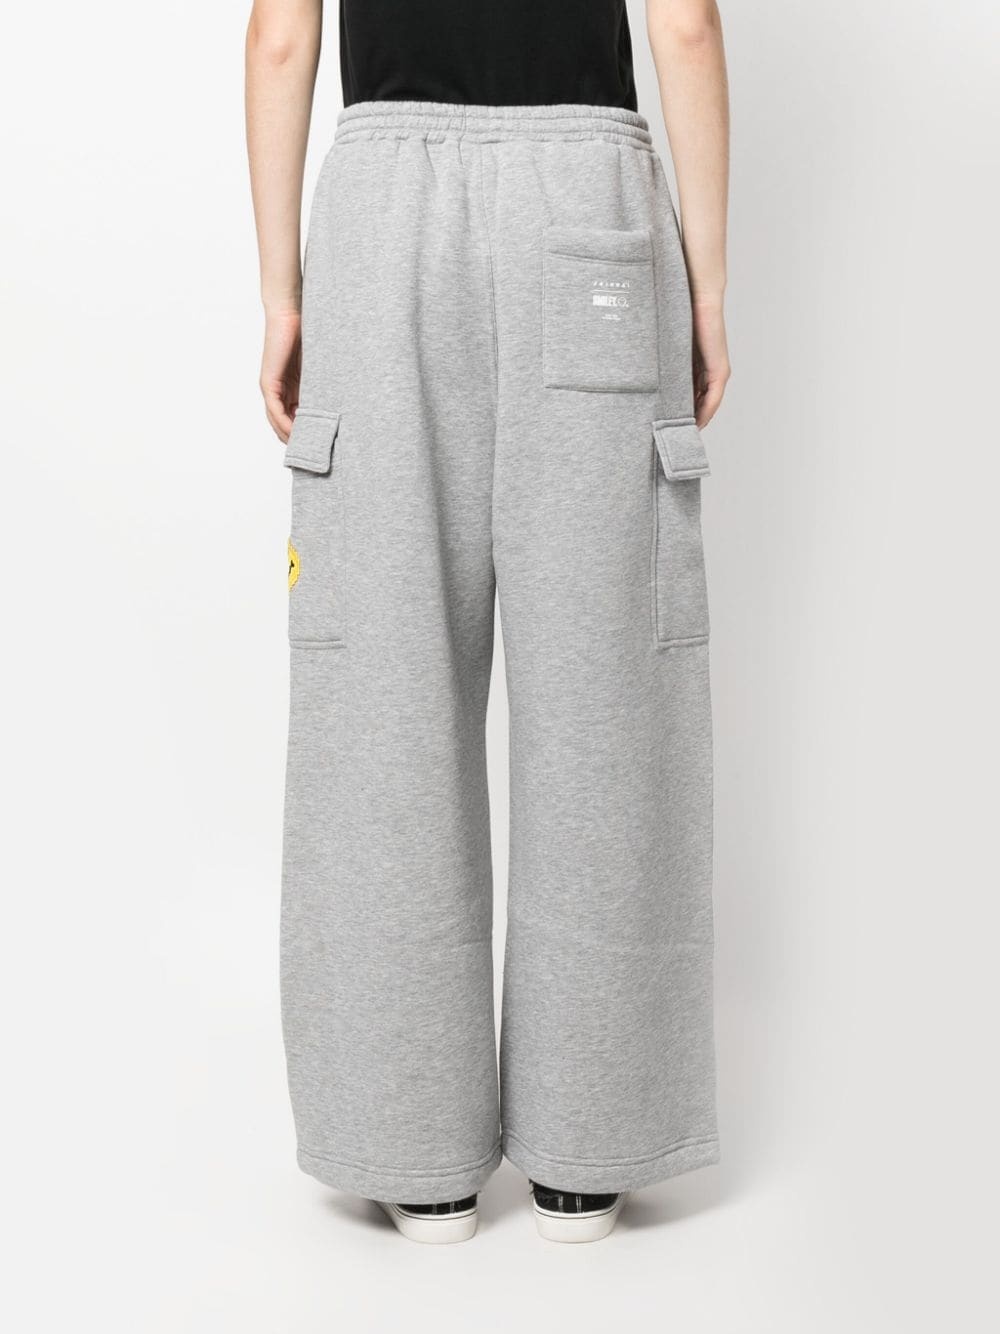 smiley-face track trousers - 4